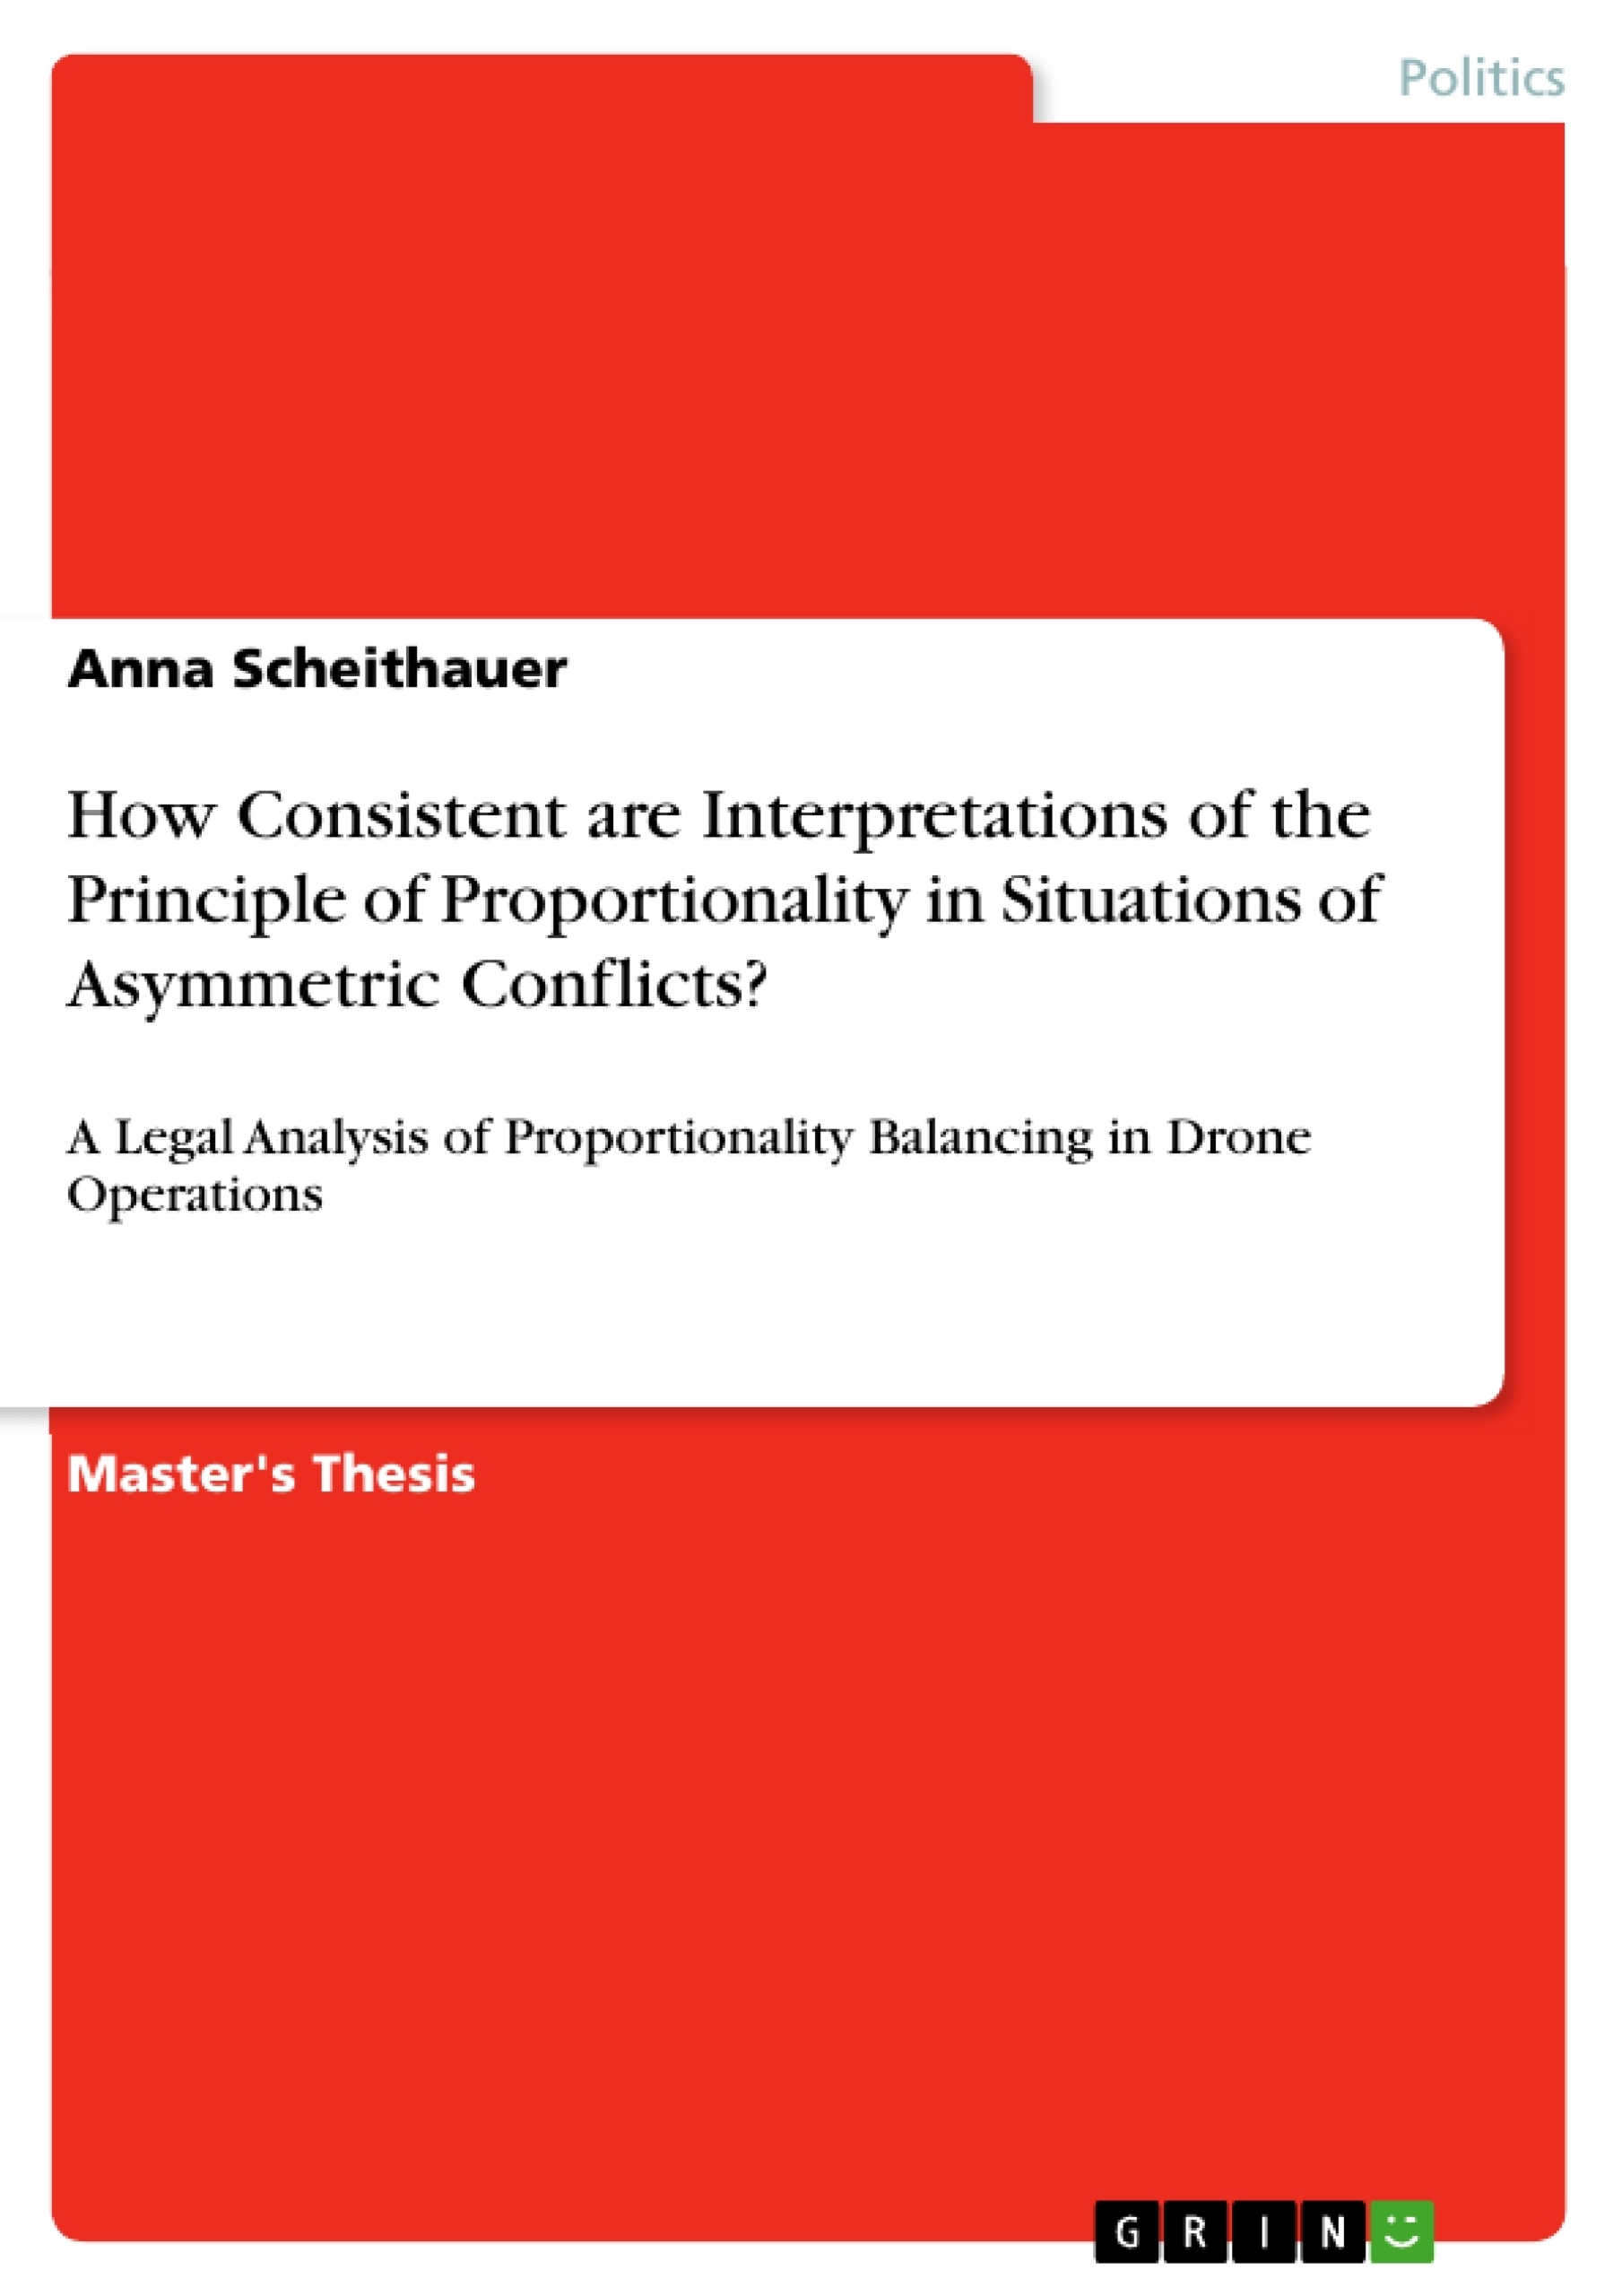 Title: How Consistent are Interpretations of the Principle of Proportionality in Situations of Asymmetric Conflicts?